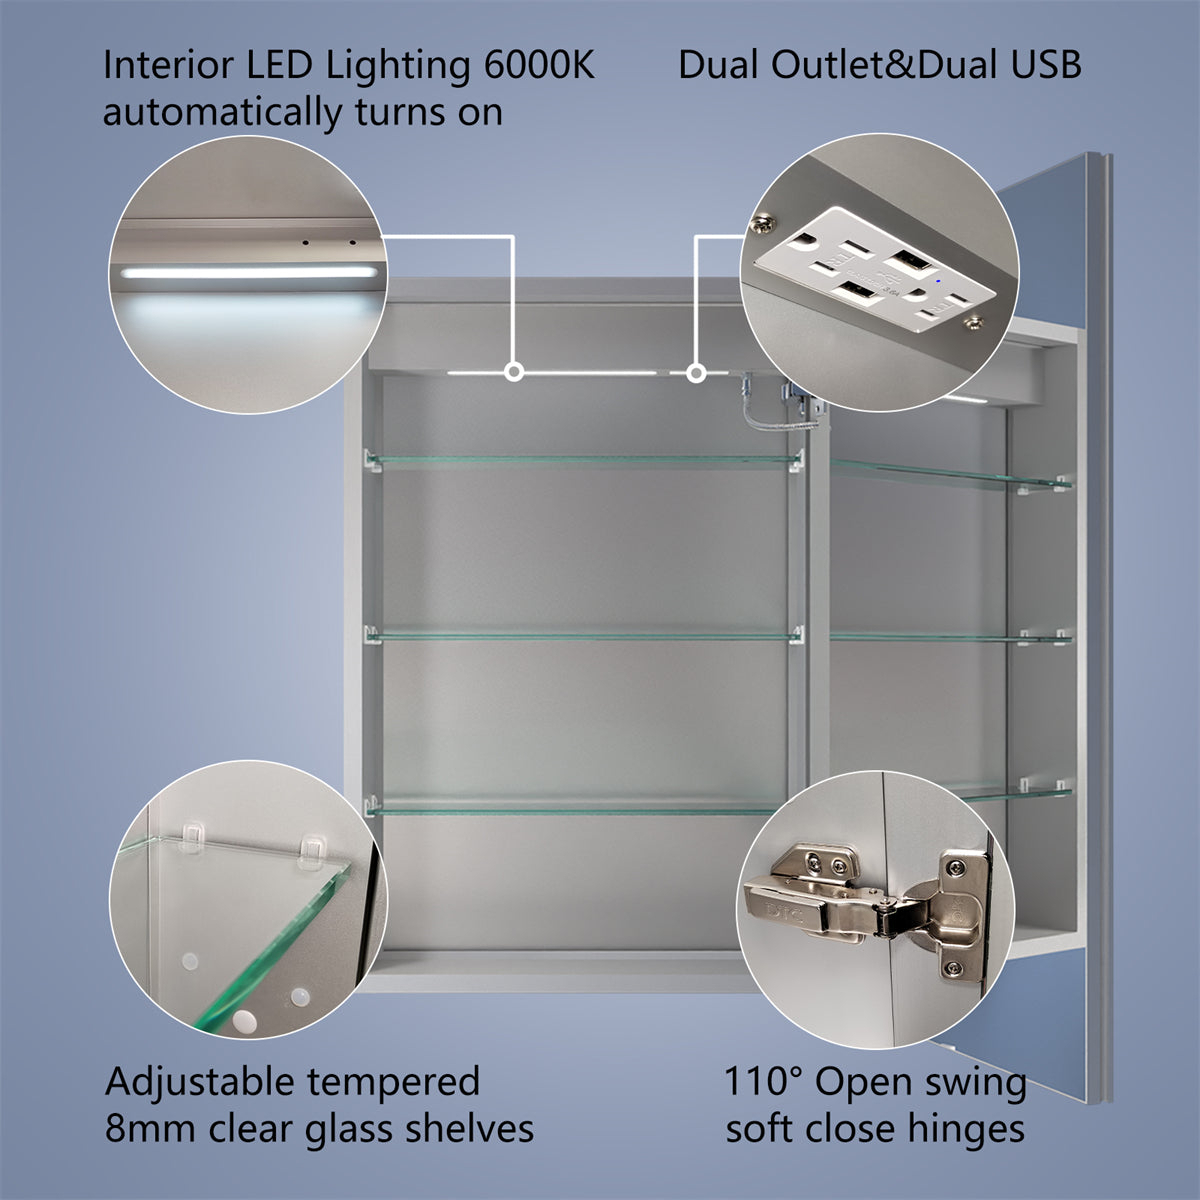 Rim 20 W X 30 H Lighted Medicine Cabinet Recessed Or Surface Led Medicine Cabinet With Outlets & USBs - Hinge On Righ Side